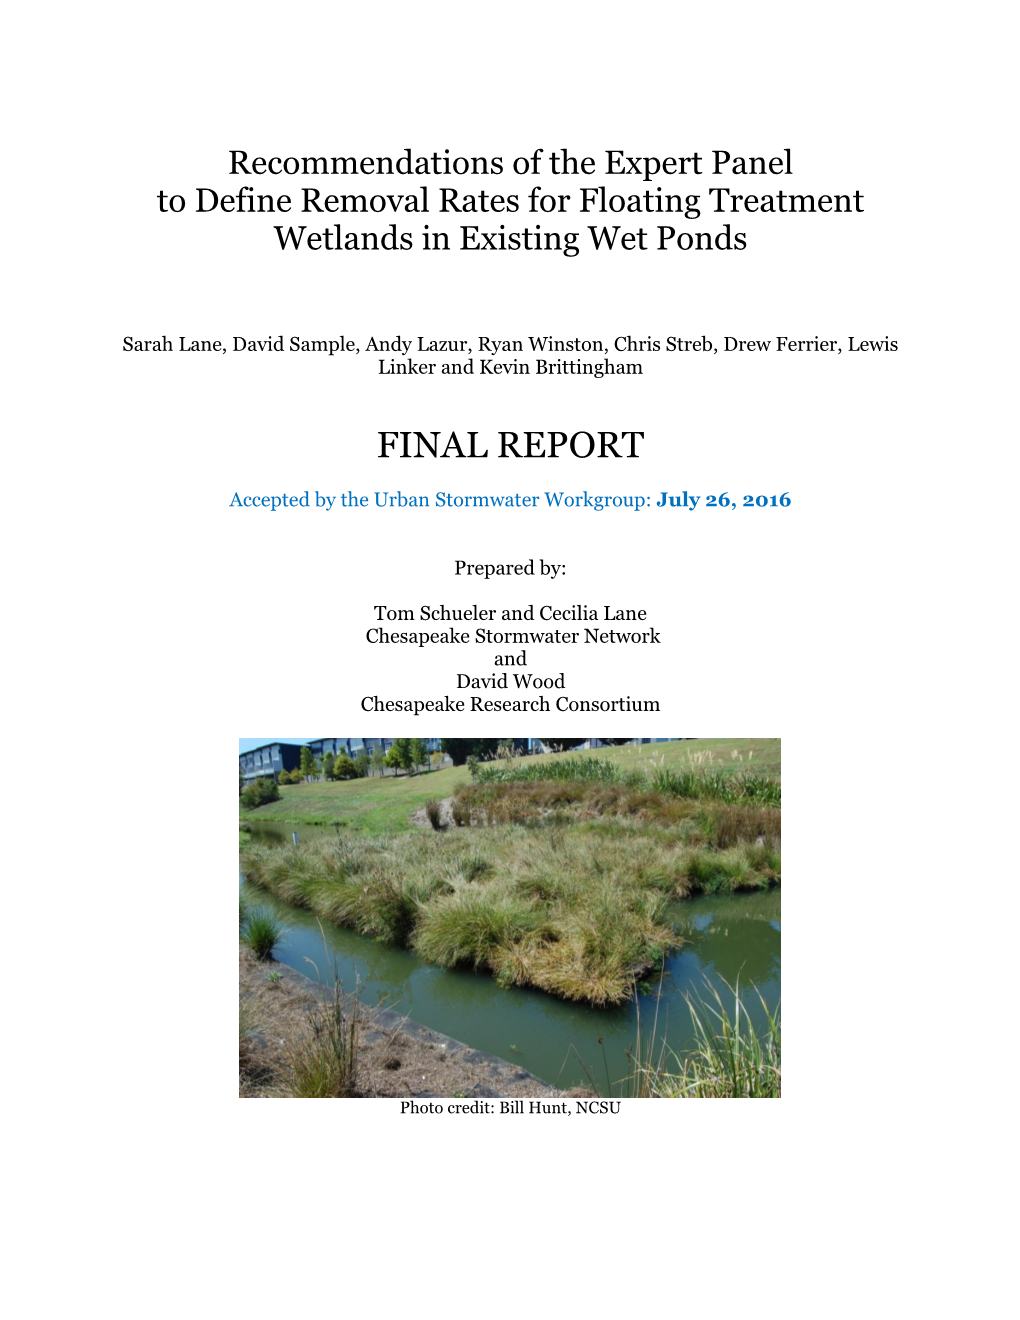 Panel Report on Floating Treatment Wetlands in Existing Wet Ponds